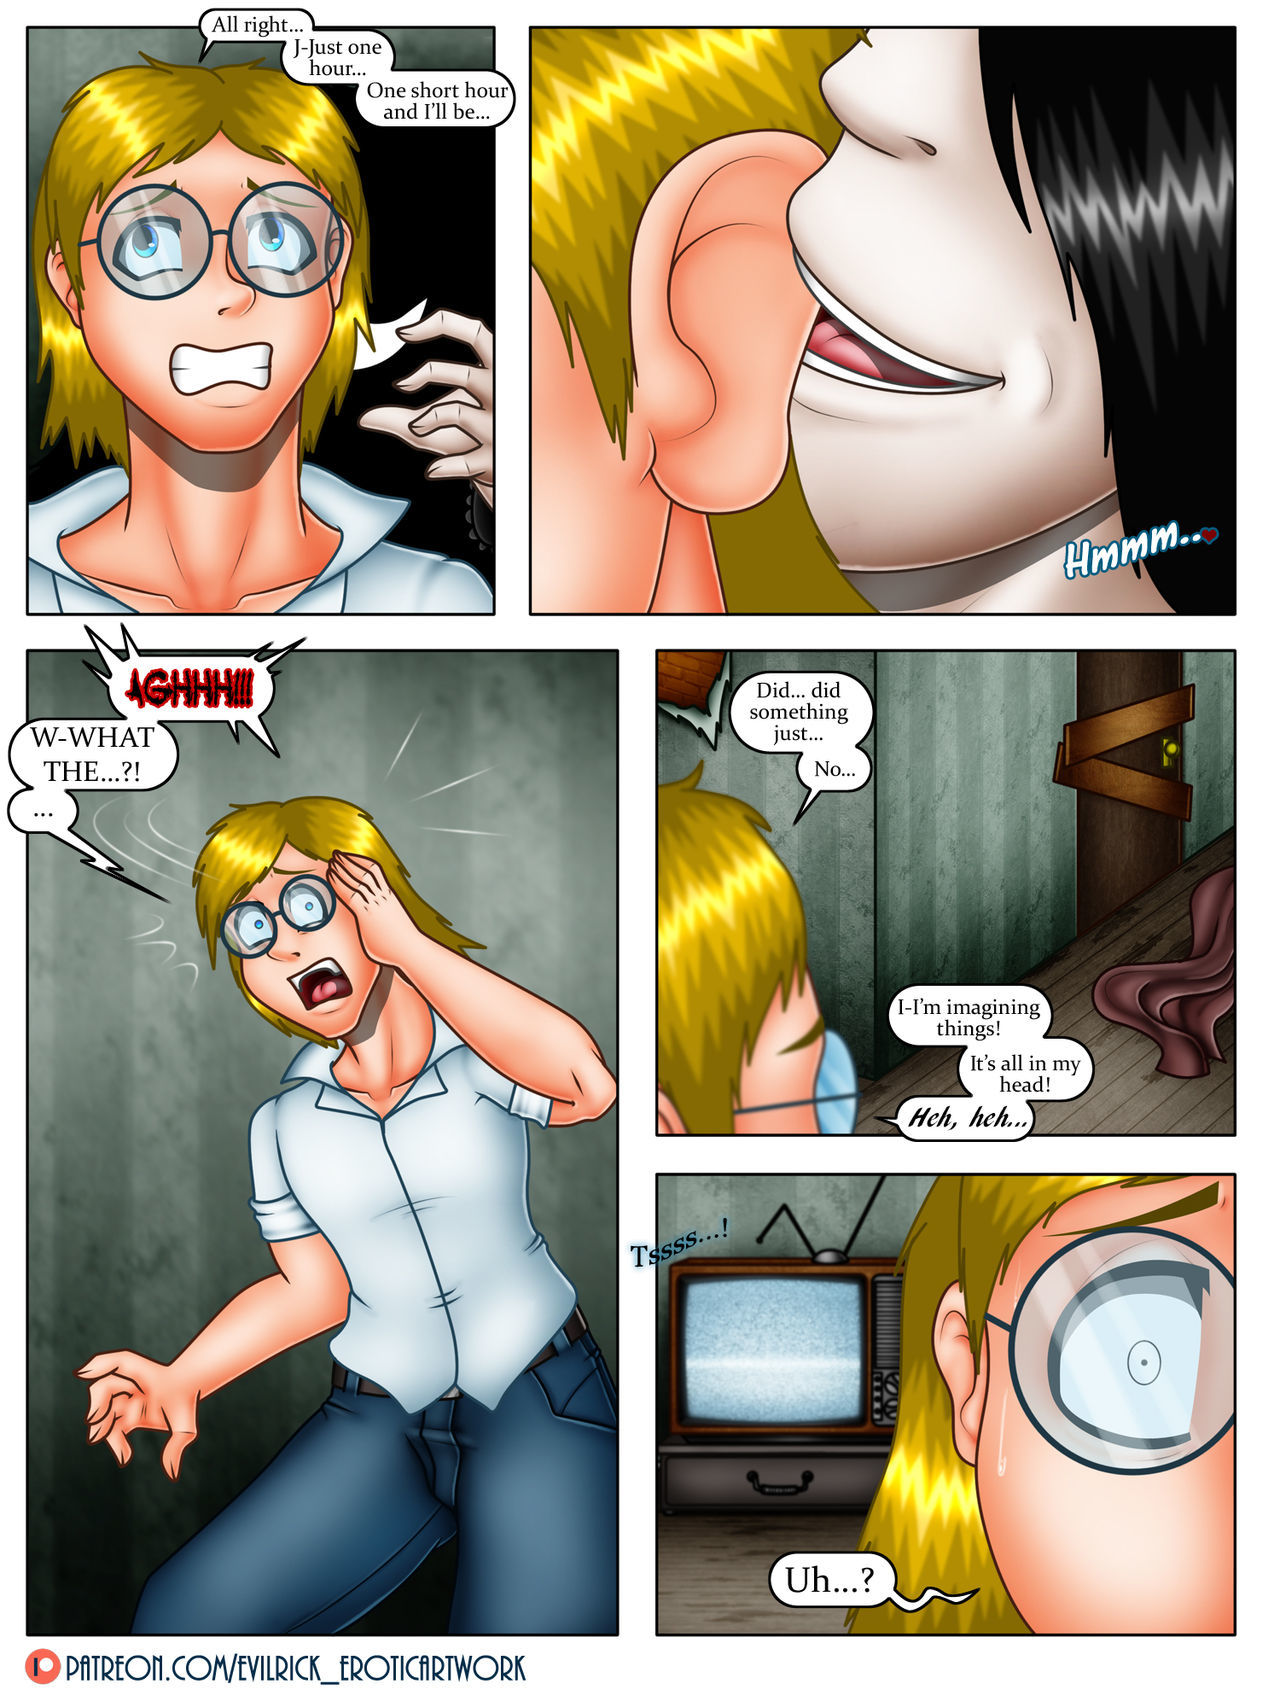 Evil Rick - Paranormal Activity page 6